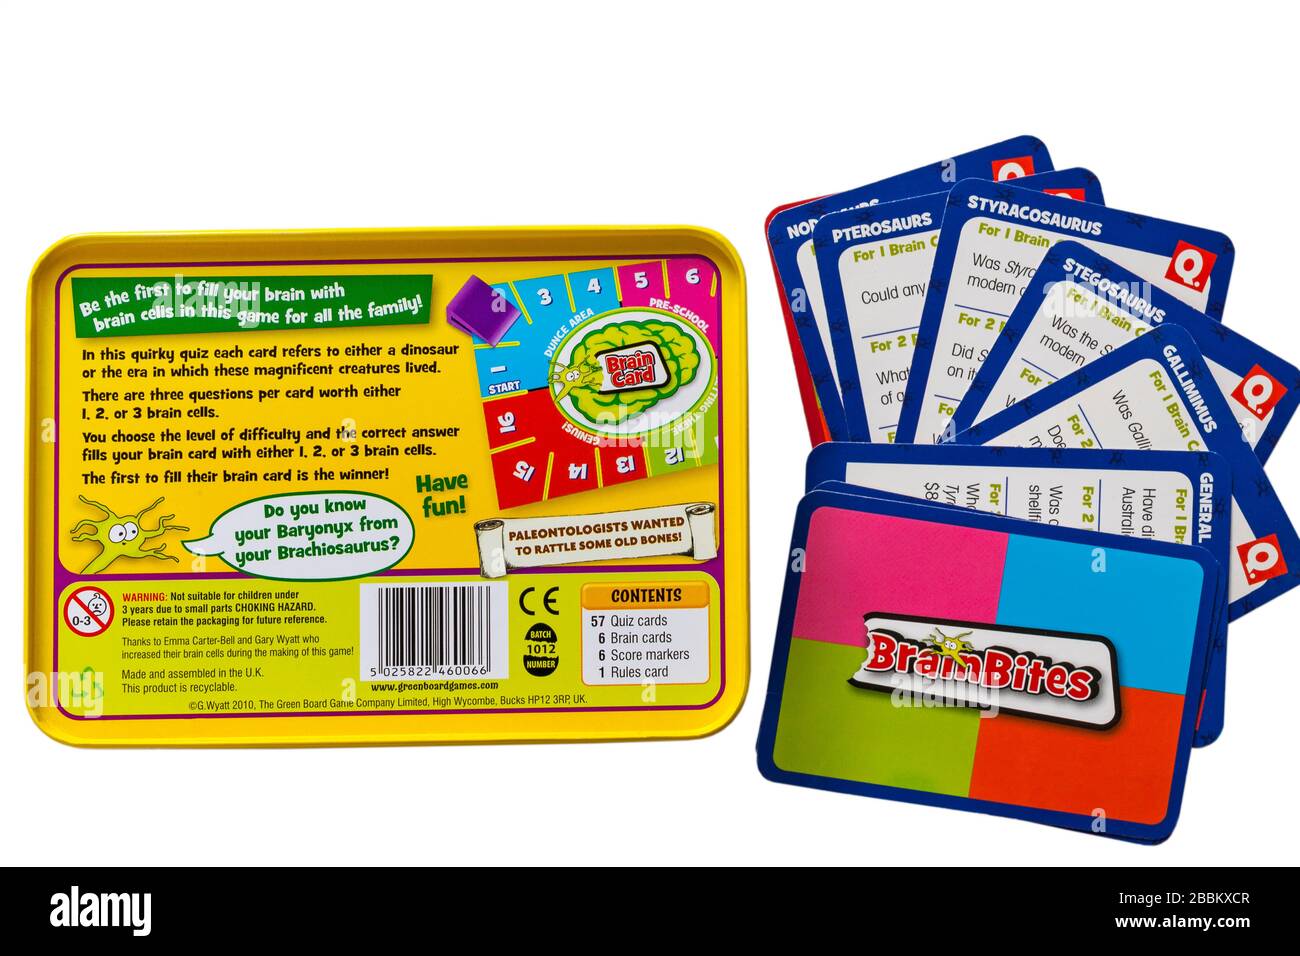 Brainbites Dinosaurs gain brain cells in this quirky quiz by the Green Board Game Co set on white background - bottom of tin and cards Stock Photo